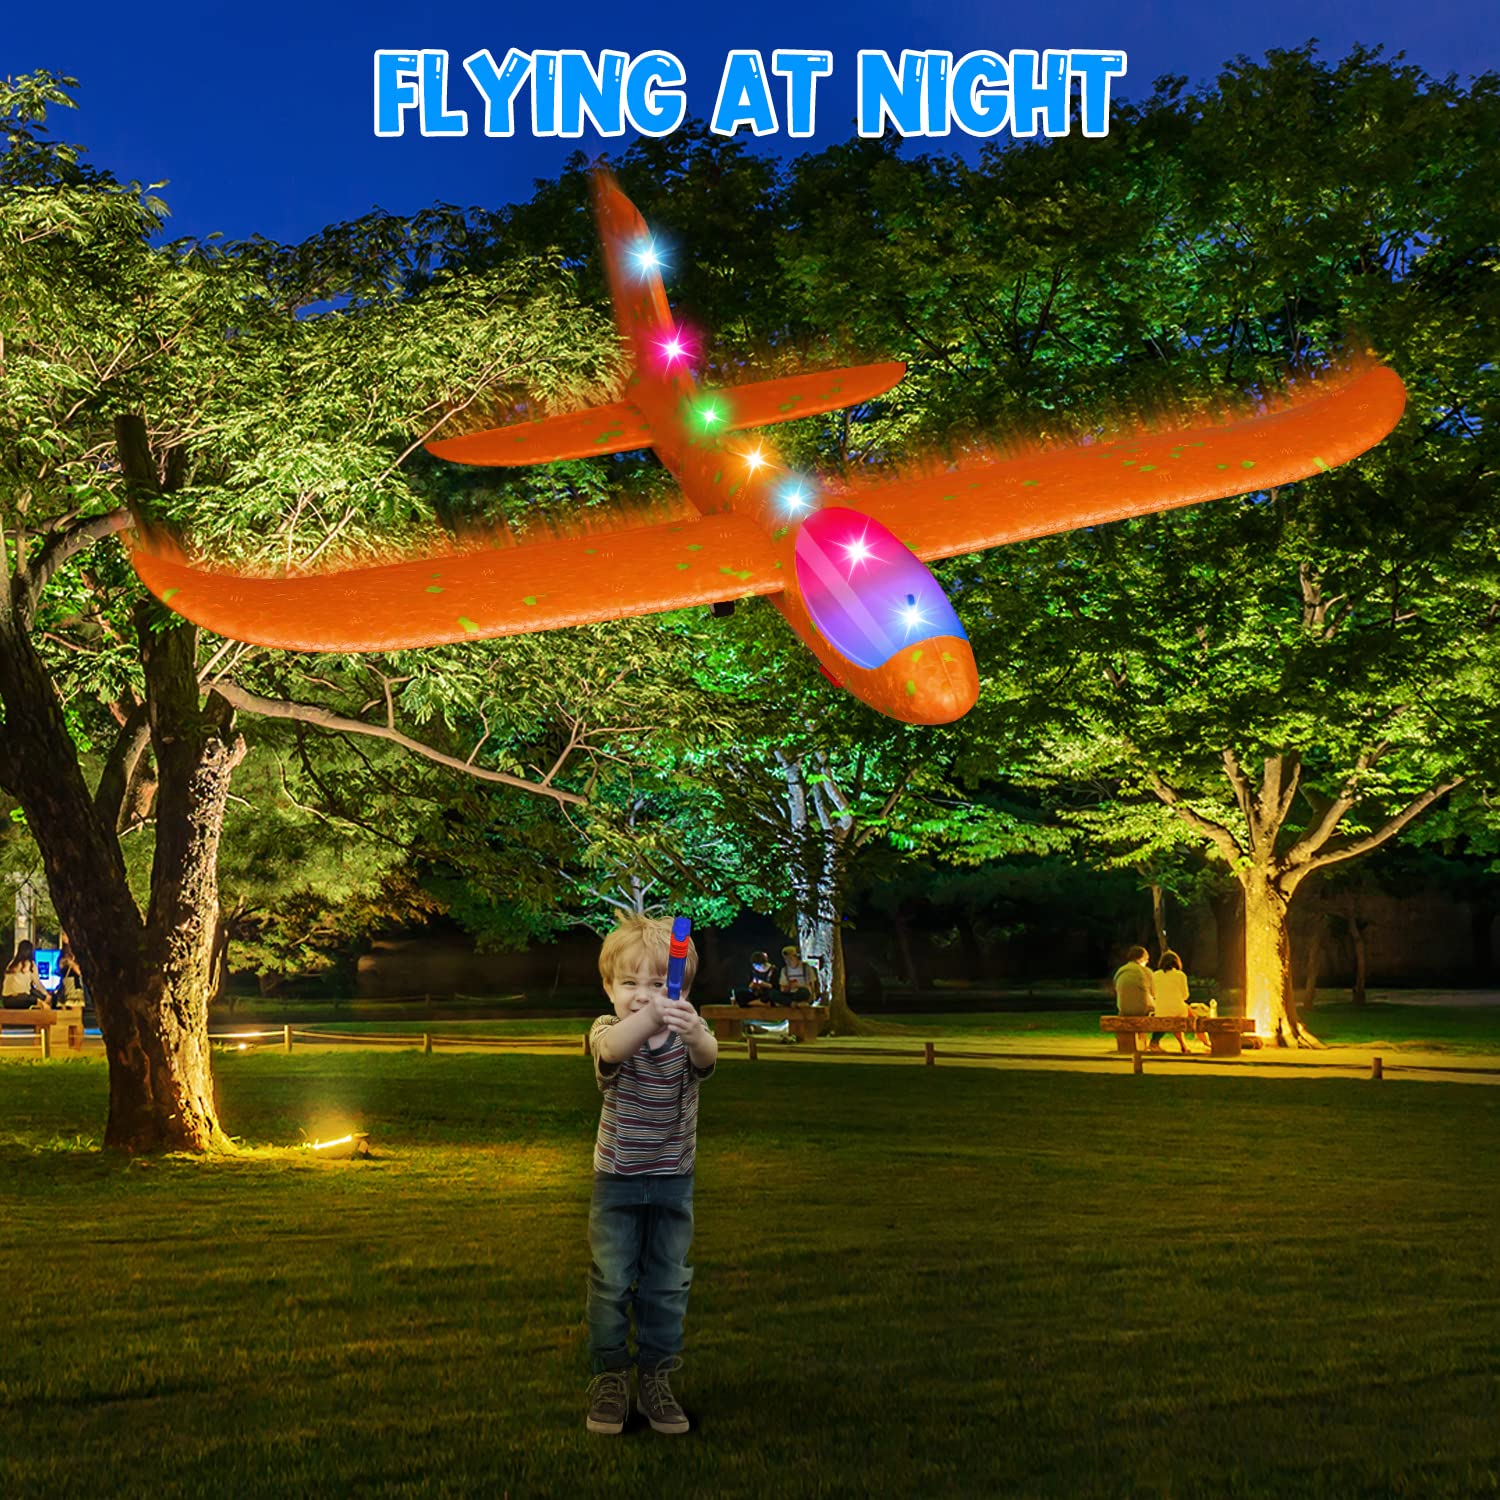 TOYFIT 2 Pack LED Light Airplane Launcher Toy Set, Throwing Foam Glider Catapult Plane, Outdoor Flying Games Toys for Kids, Birthday Gifts for Boys Girls 3 4 5 6 7 Years Old